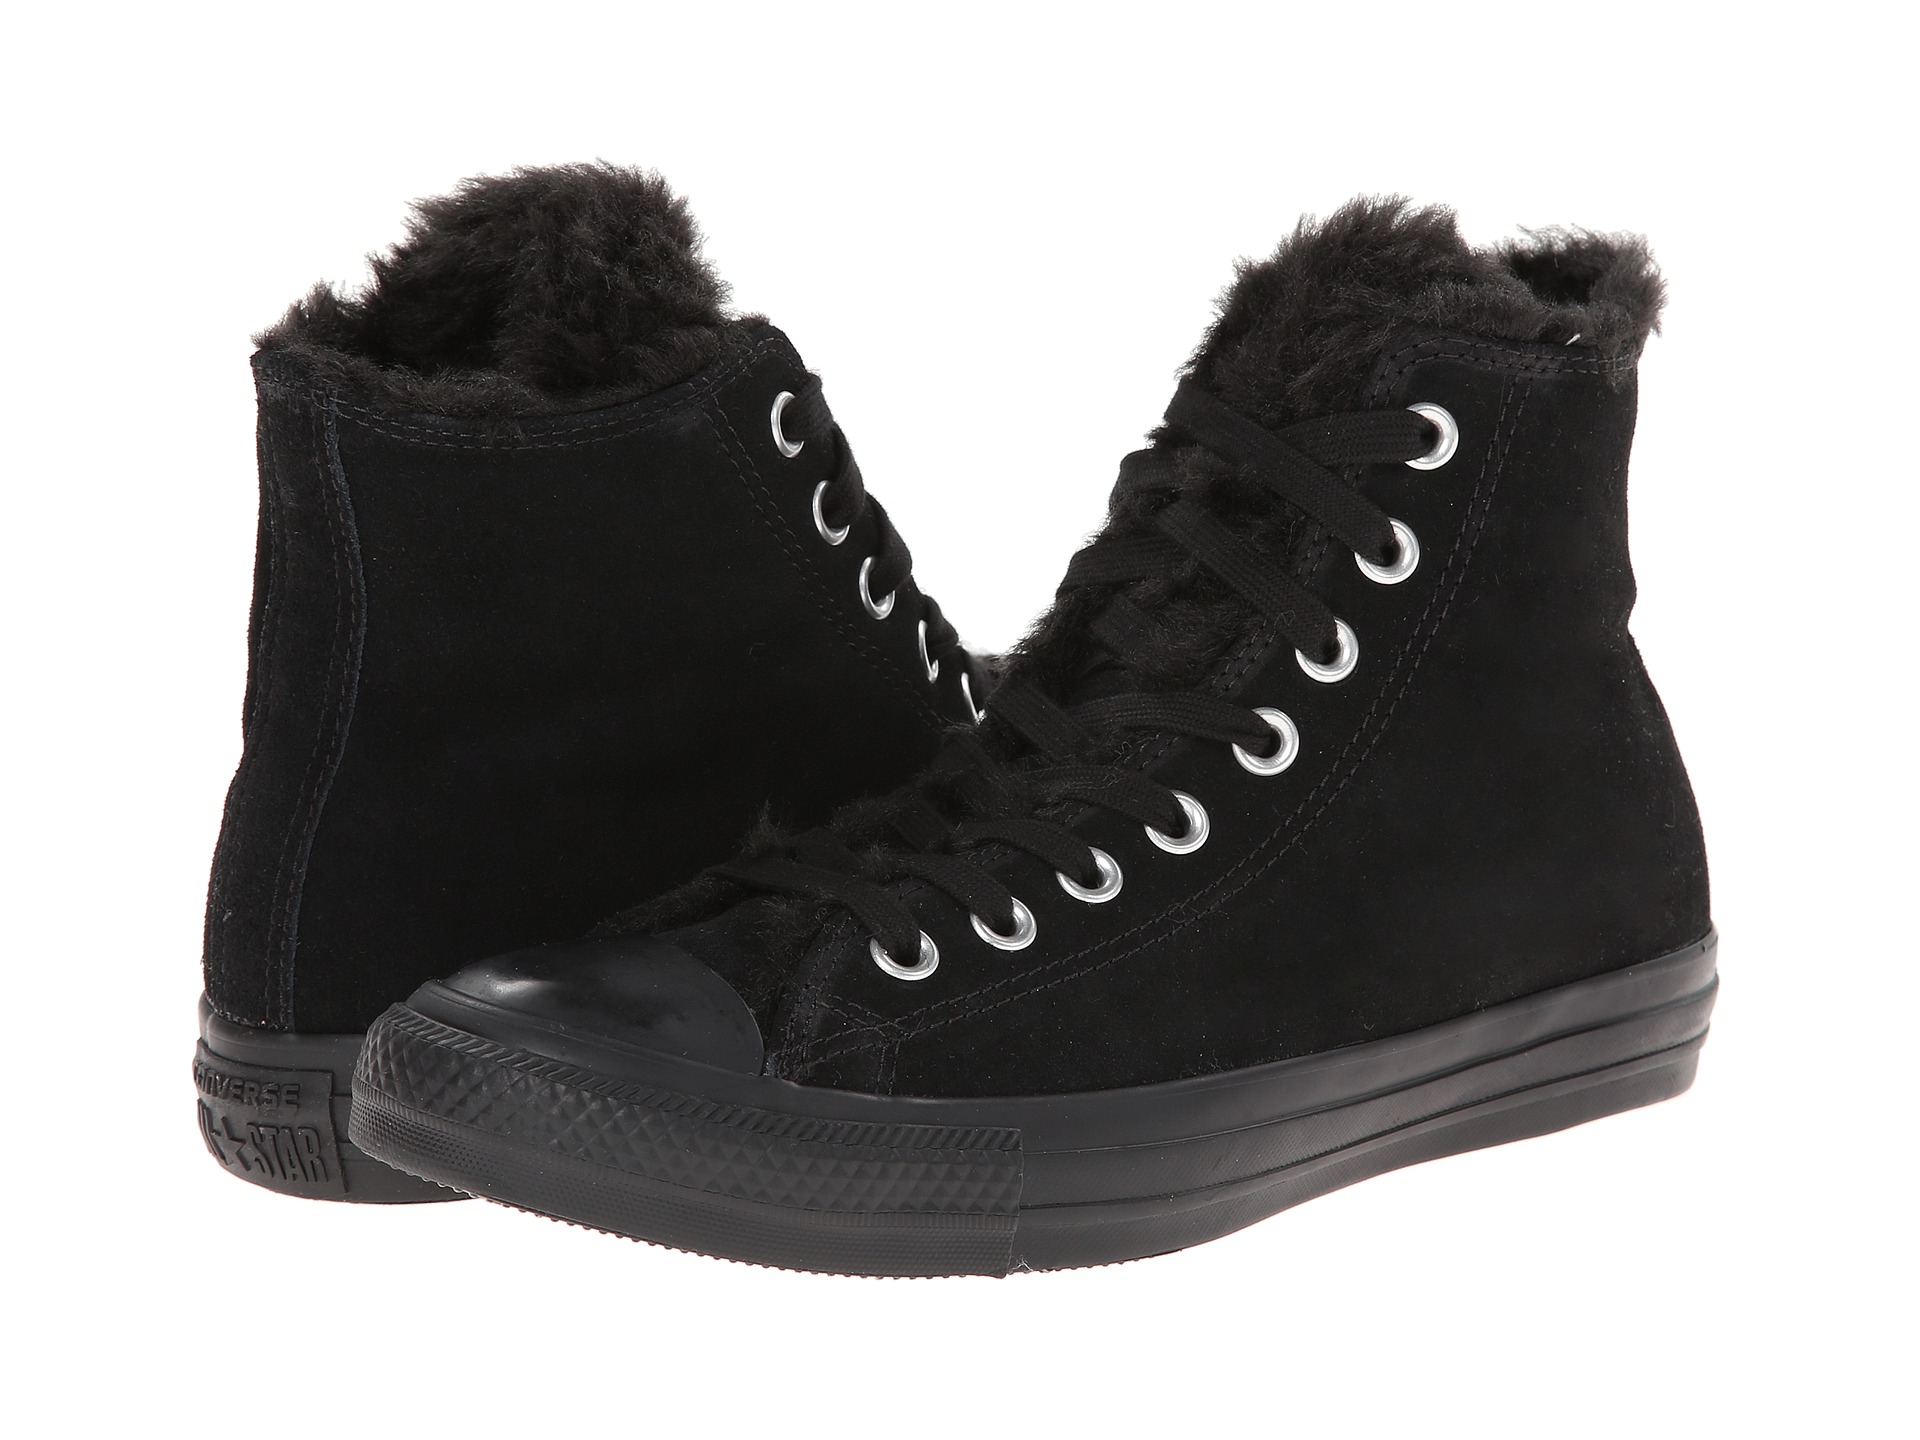 Converse Chuck Taylor All Star Suede Fur Hi | Shipped Free at Zappos